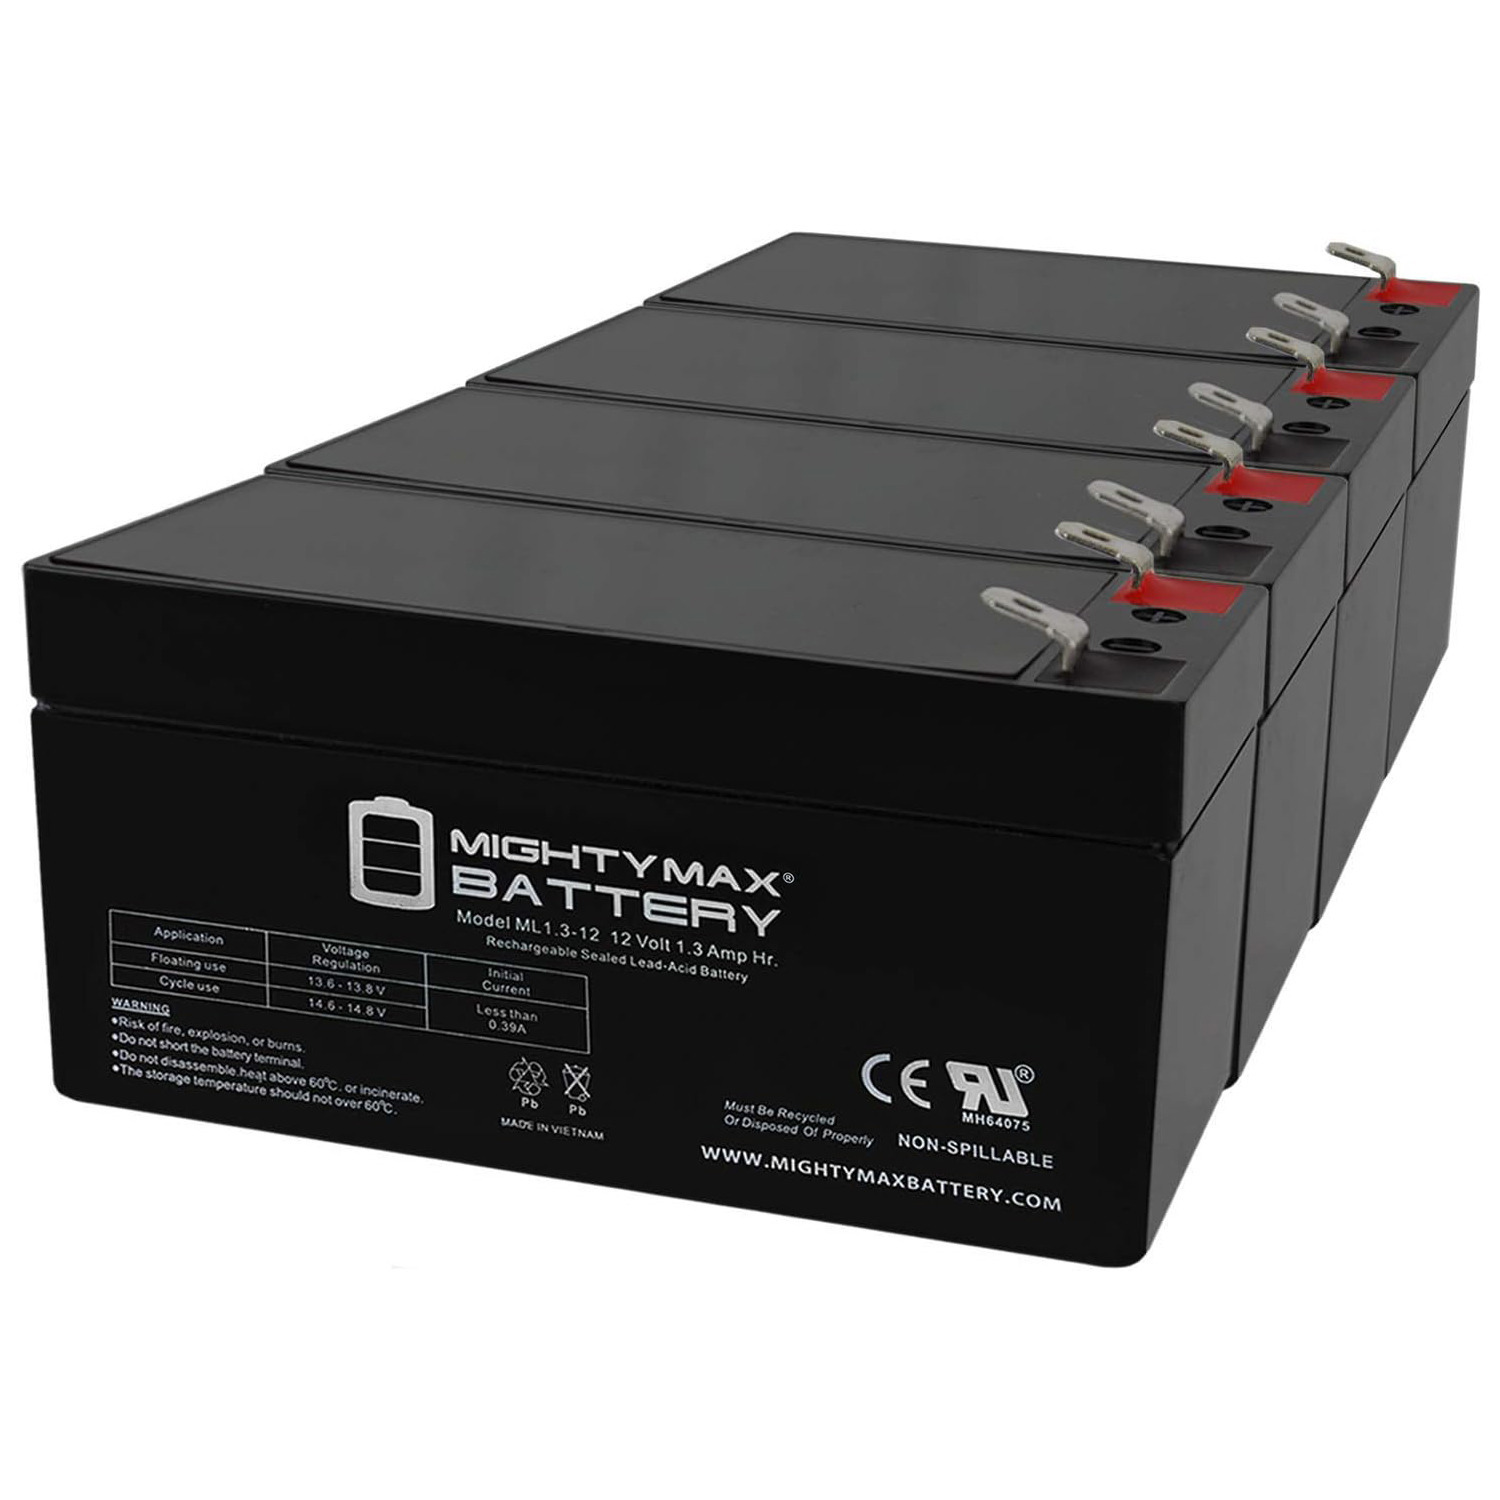 12V 1.3Ah Replacement Battery for U-Power UP1.3-12 - 4 Pack